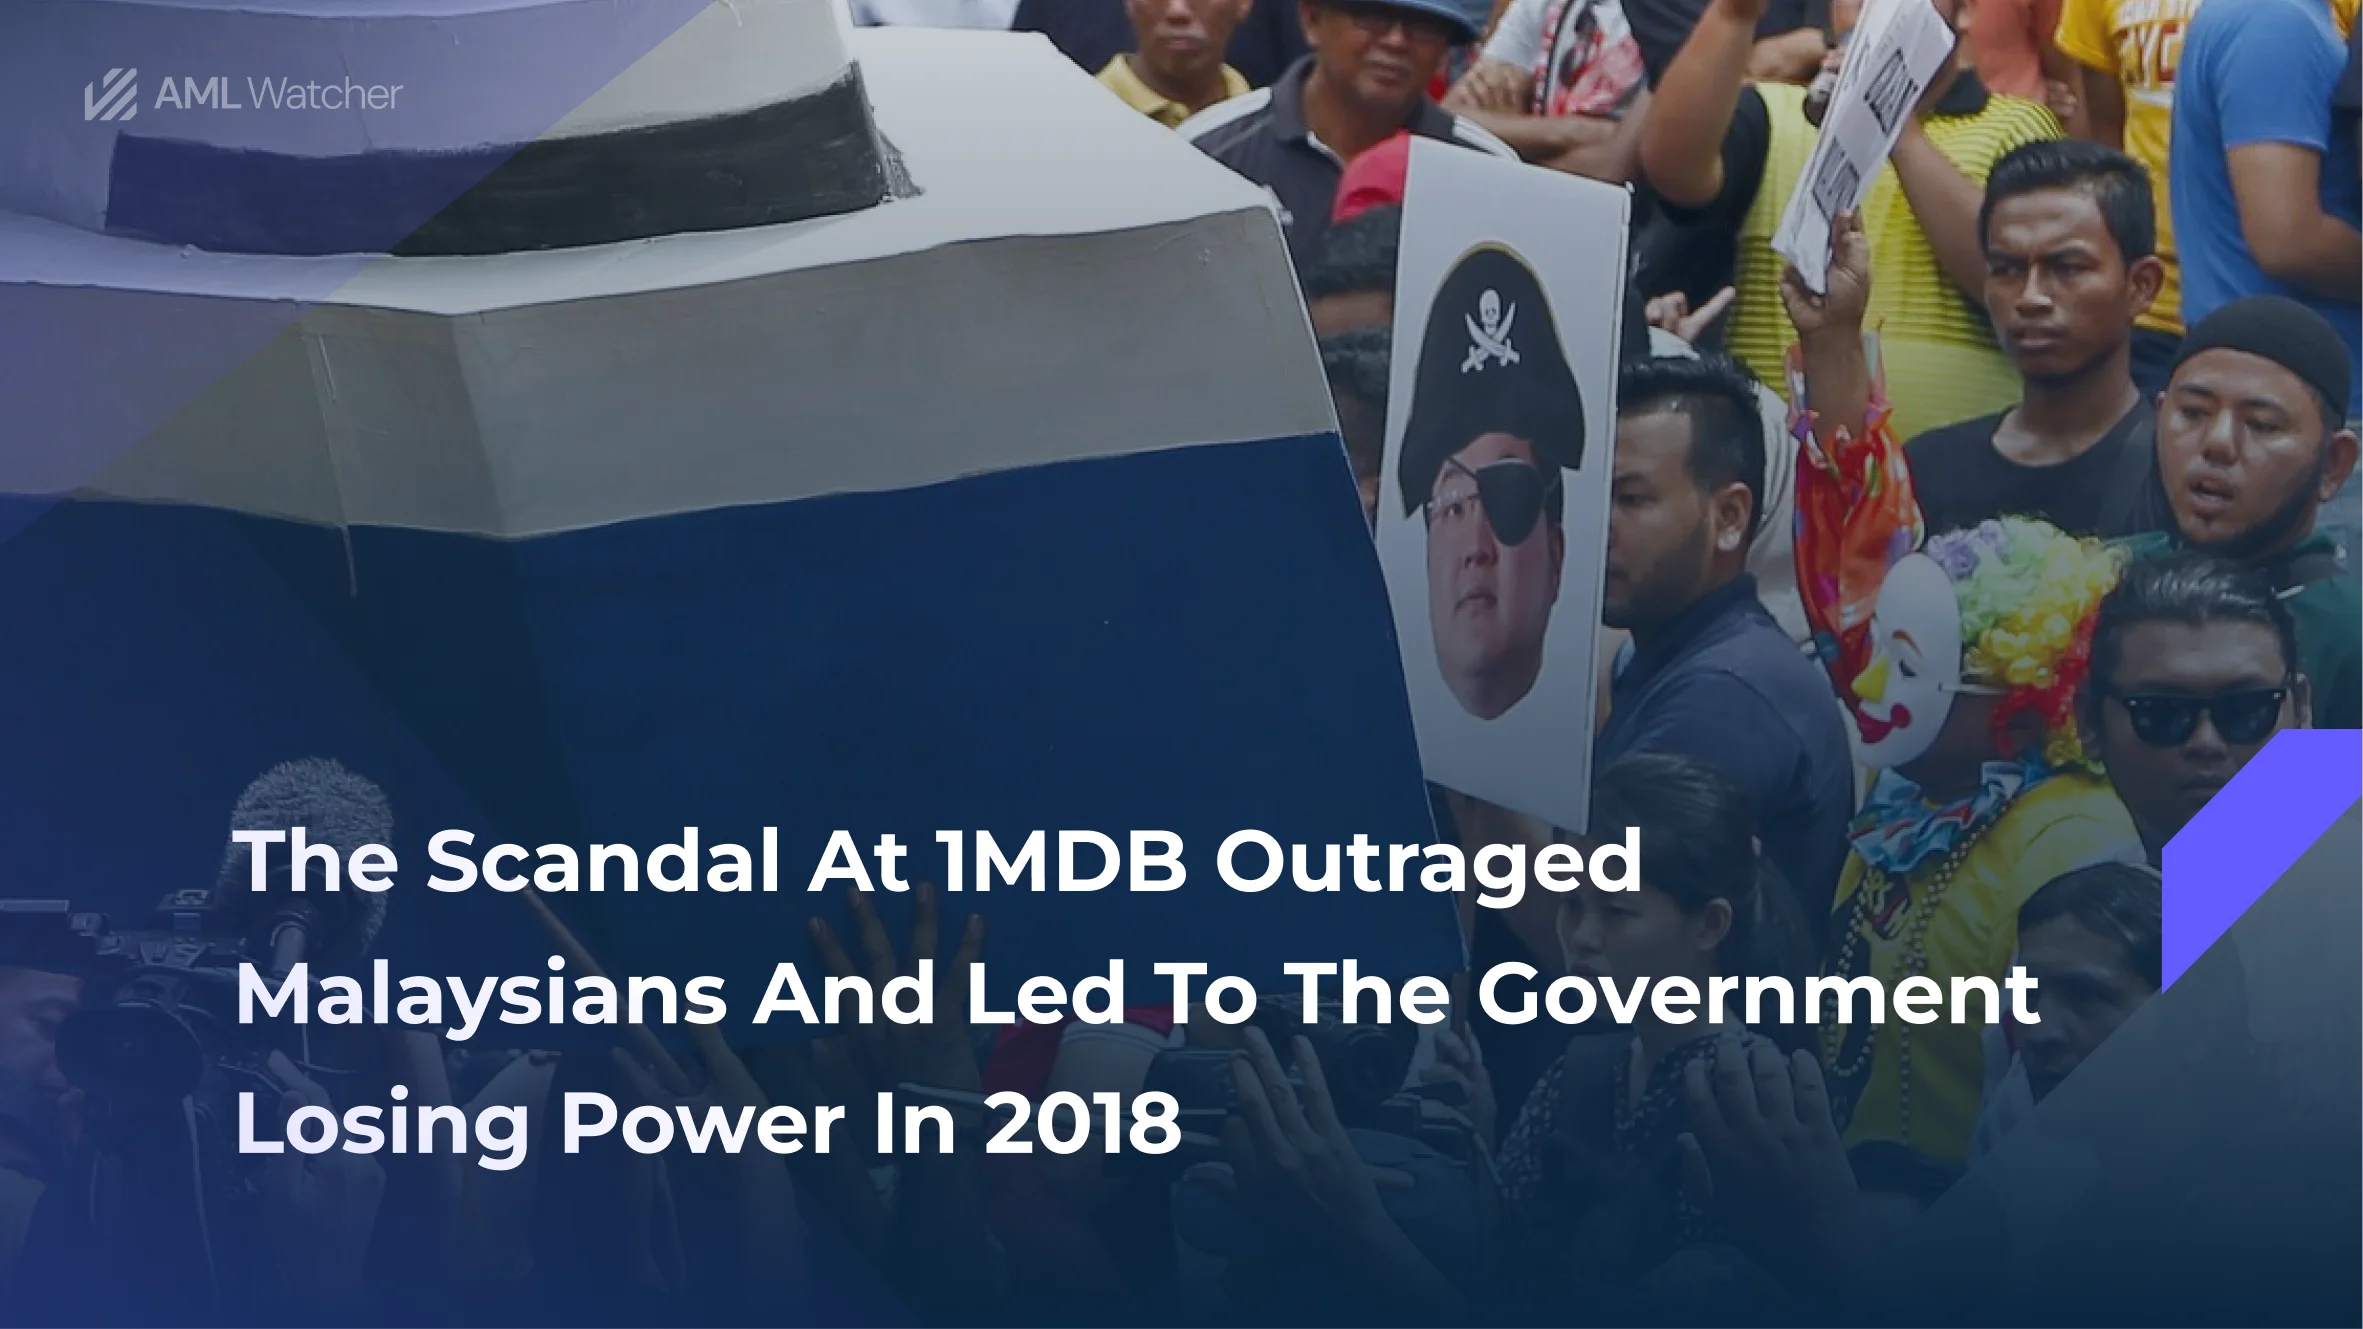 1MDB Scandal led to the fall of Najib’s Government in 2018